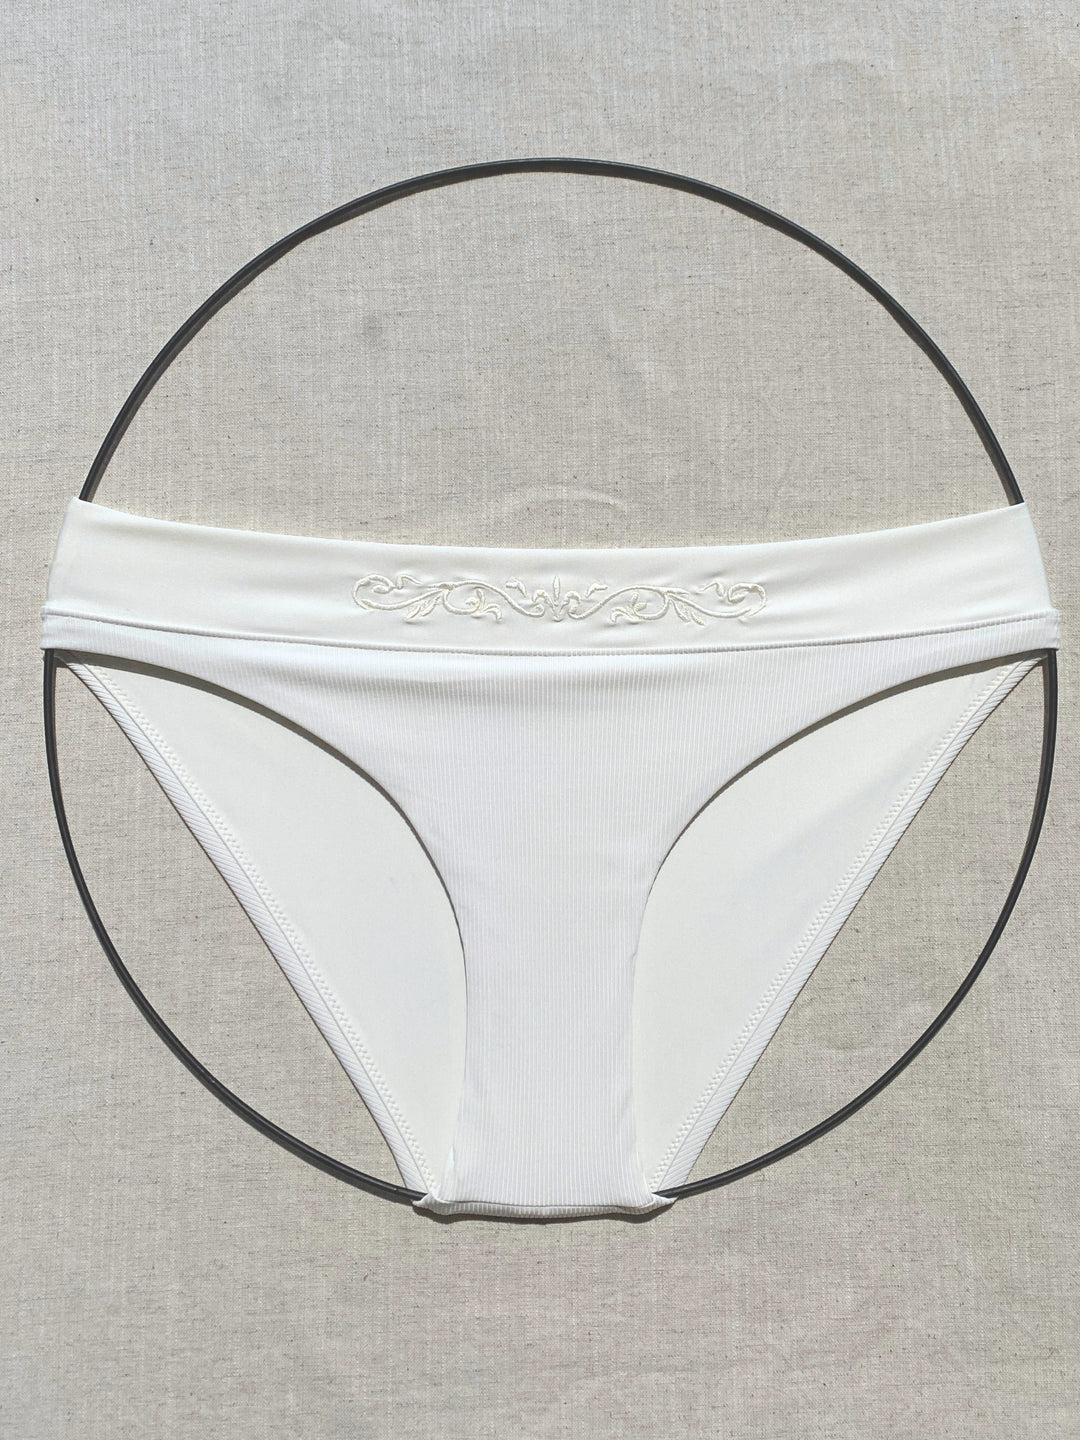 Bikini-bottom-classic-ivory-white-with-rib-fabric-and-embroidery-product-front